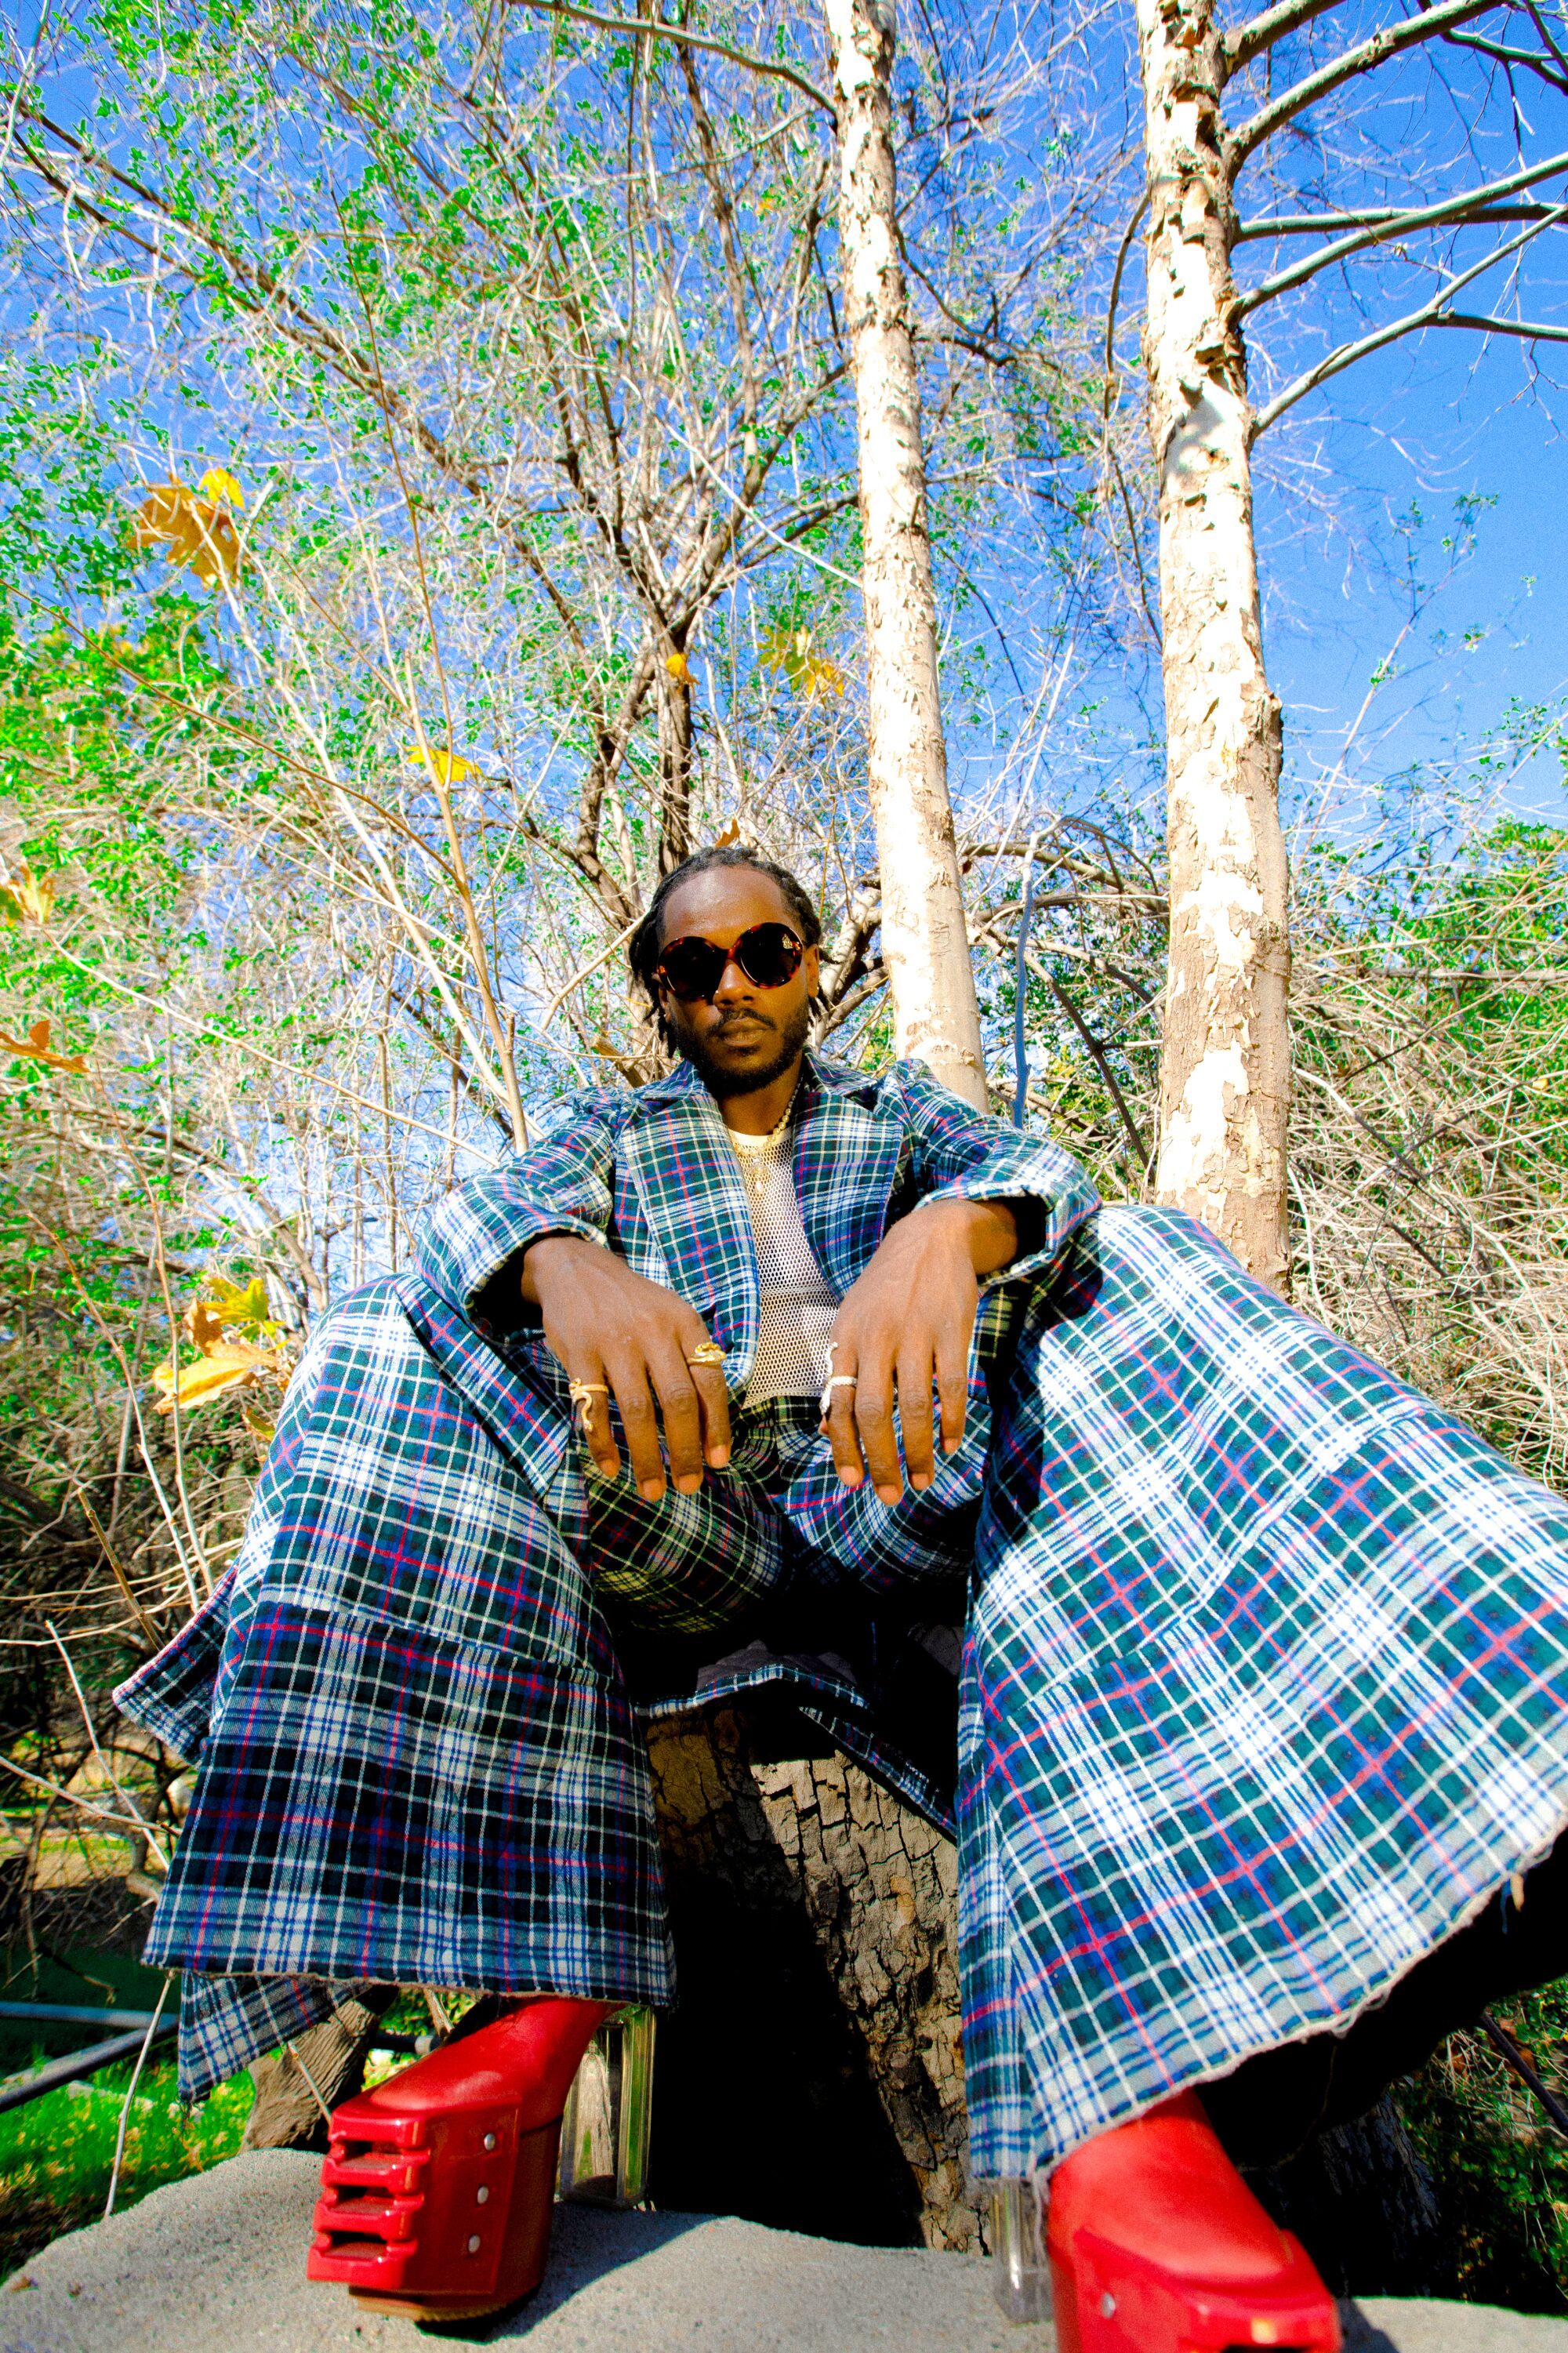 Channel Tres photographed for Image magazine on February 1, 2023 near the old zoo in the Griffth Park area of Los Angeles, CA